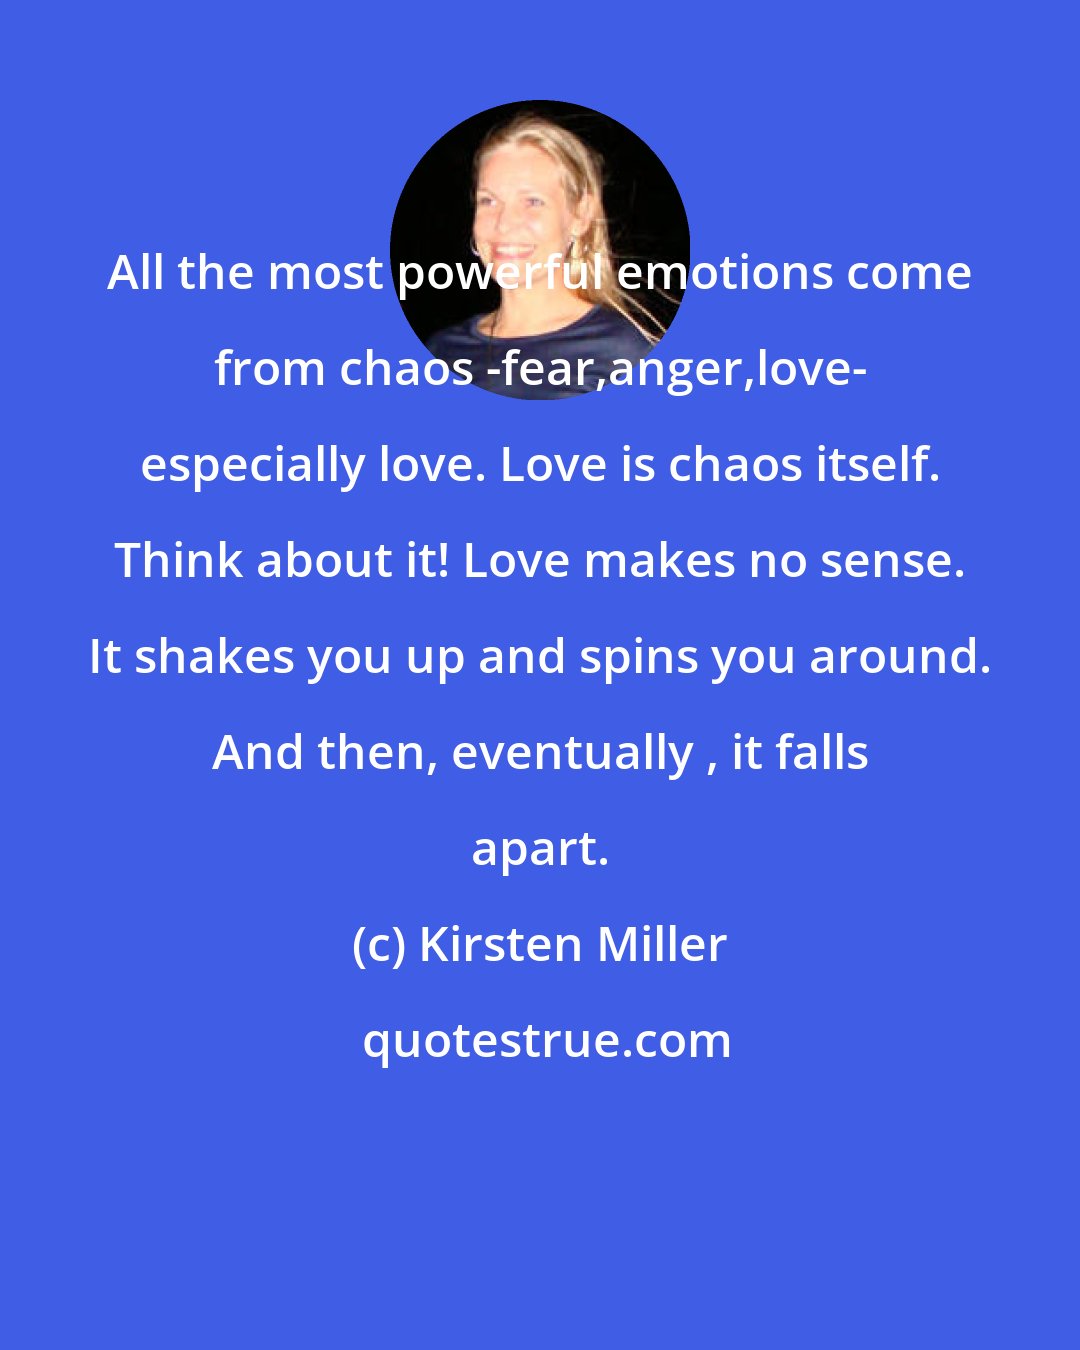 Kirsten Miller: All the most powerful emotions come from chaos -fear,anger,love- especially love. Love is chaos itself. Think about it! Love makes no sense. It shakes you up and spins you around. And then, eventually , it falls apart.